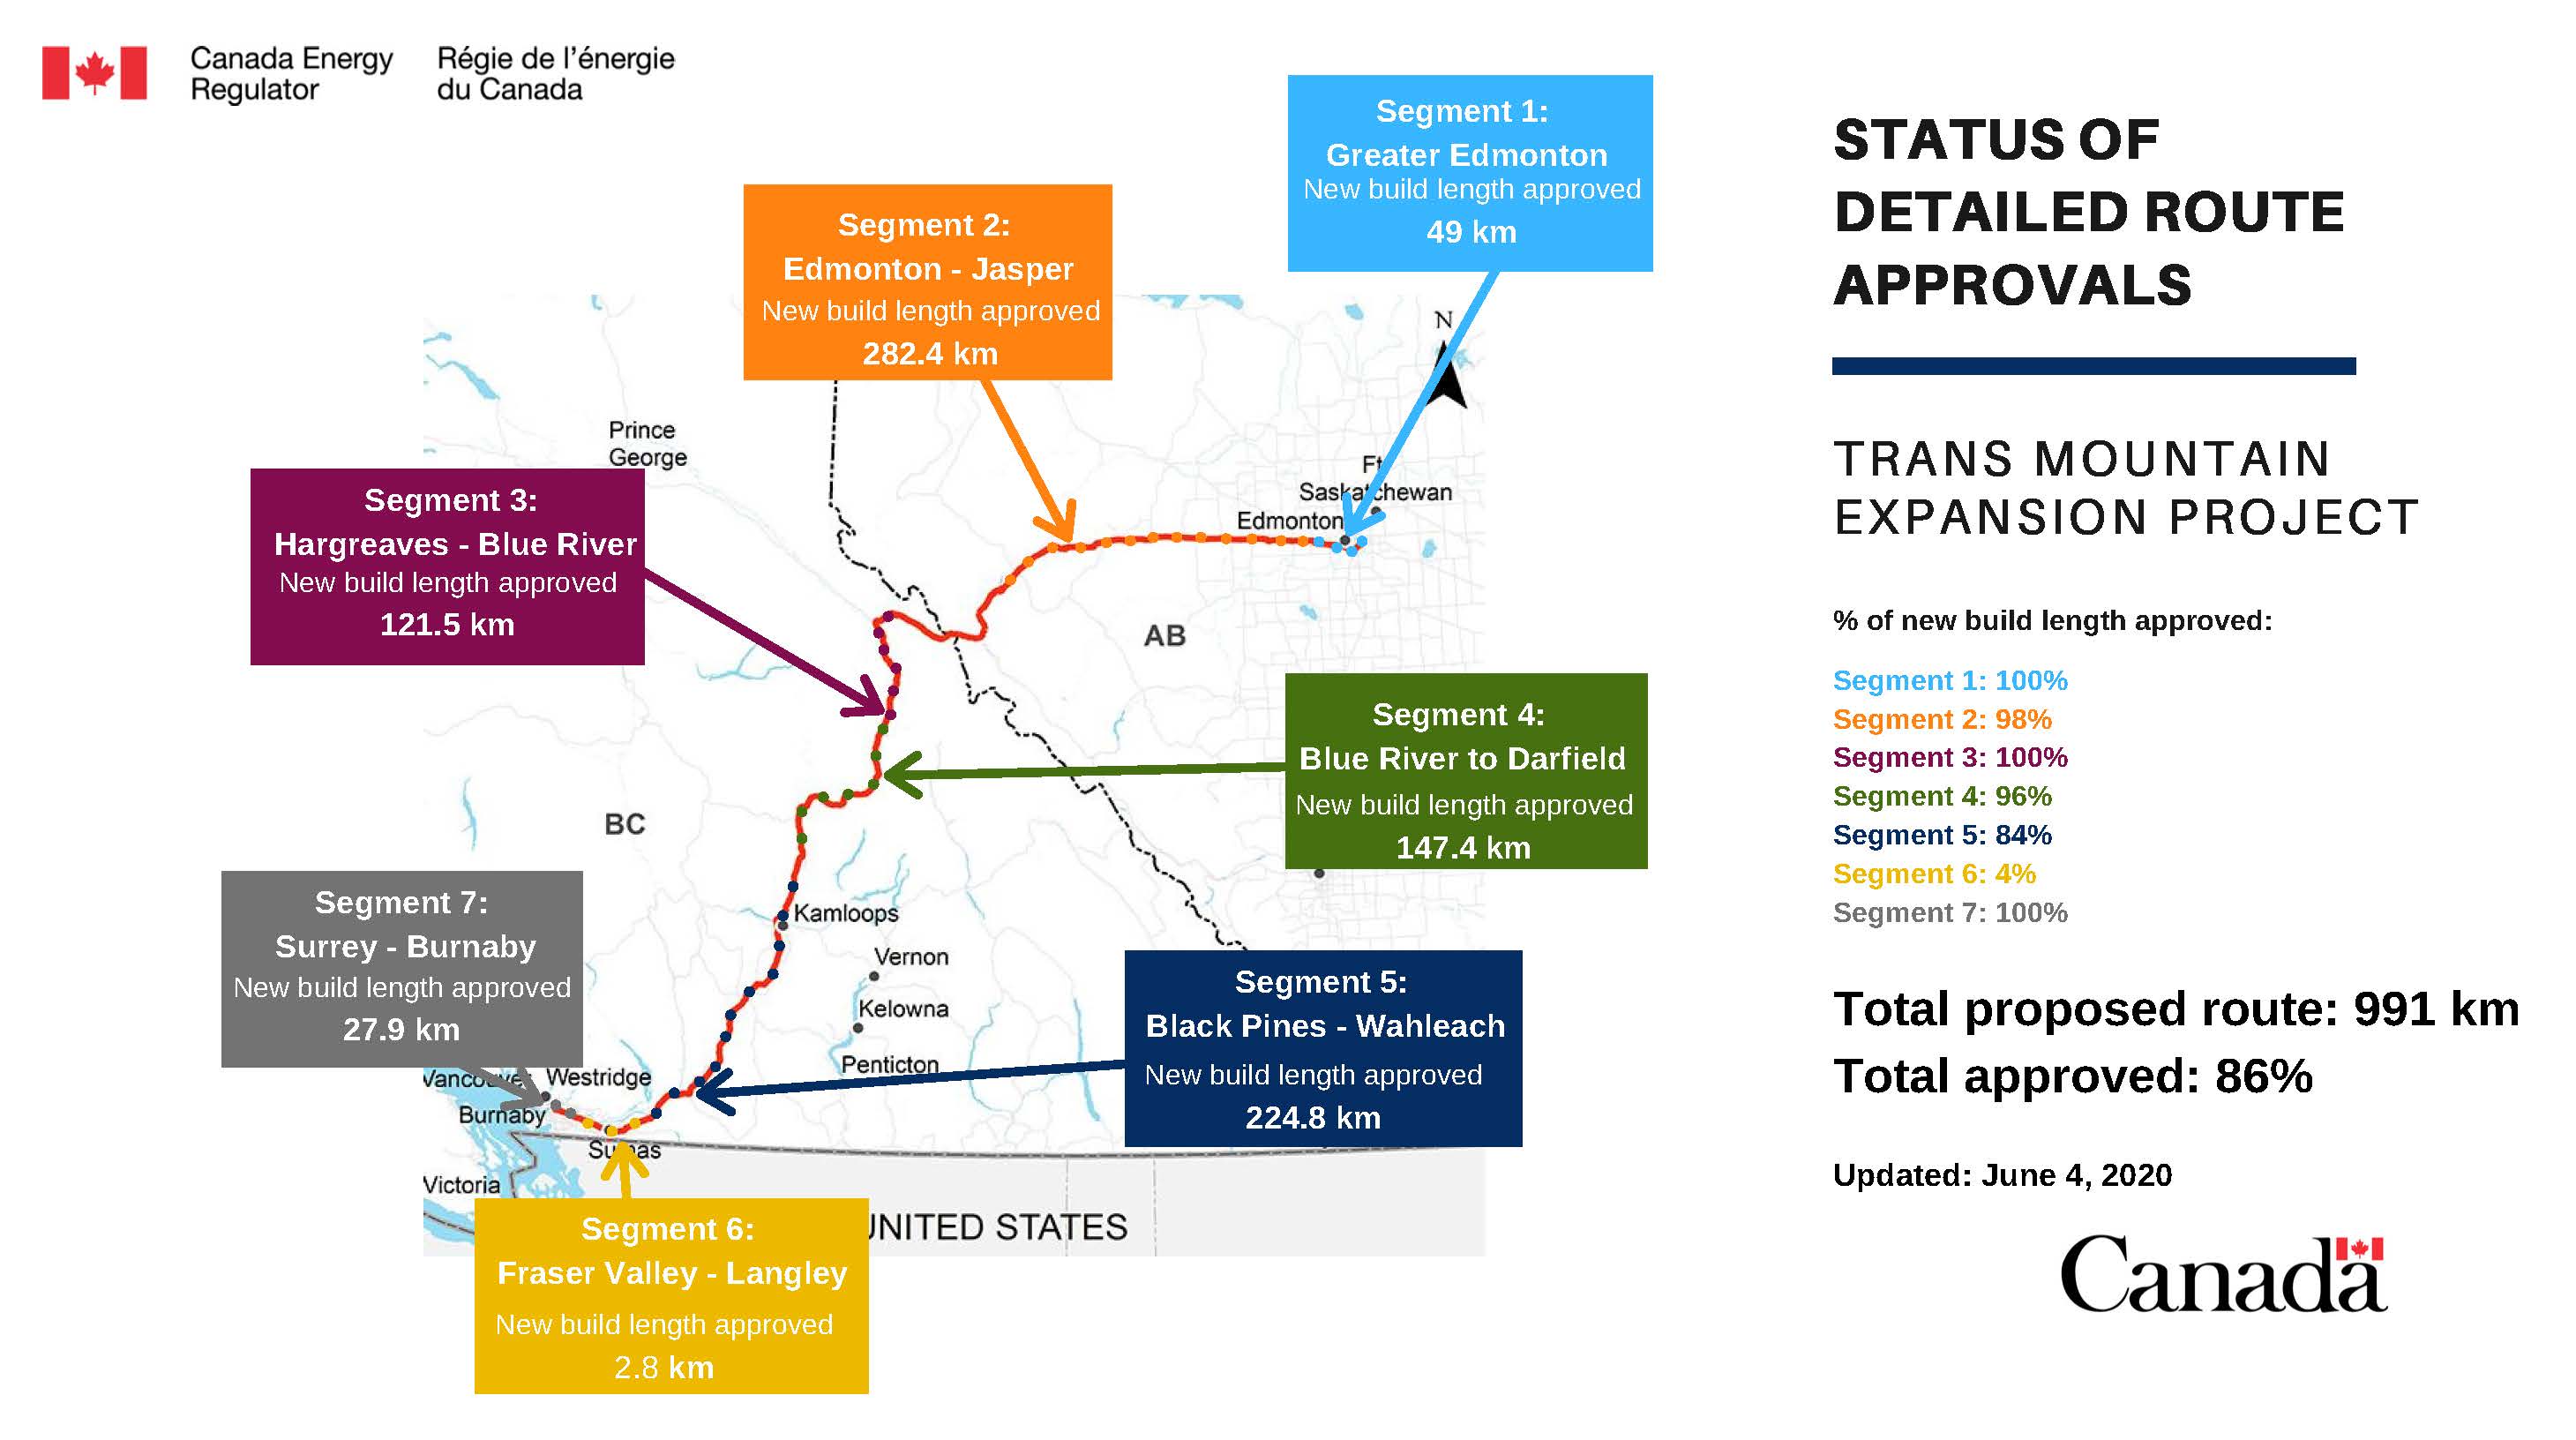 Status of 2019 detailed route approvals